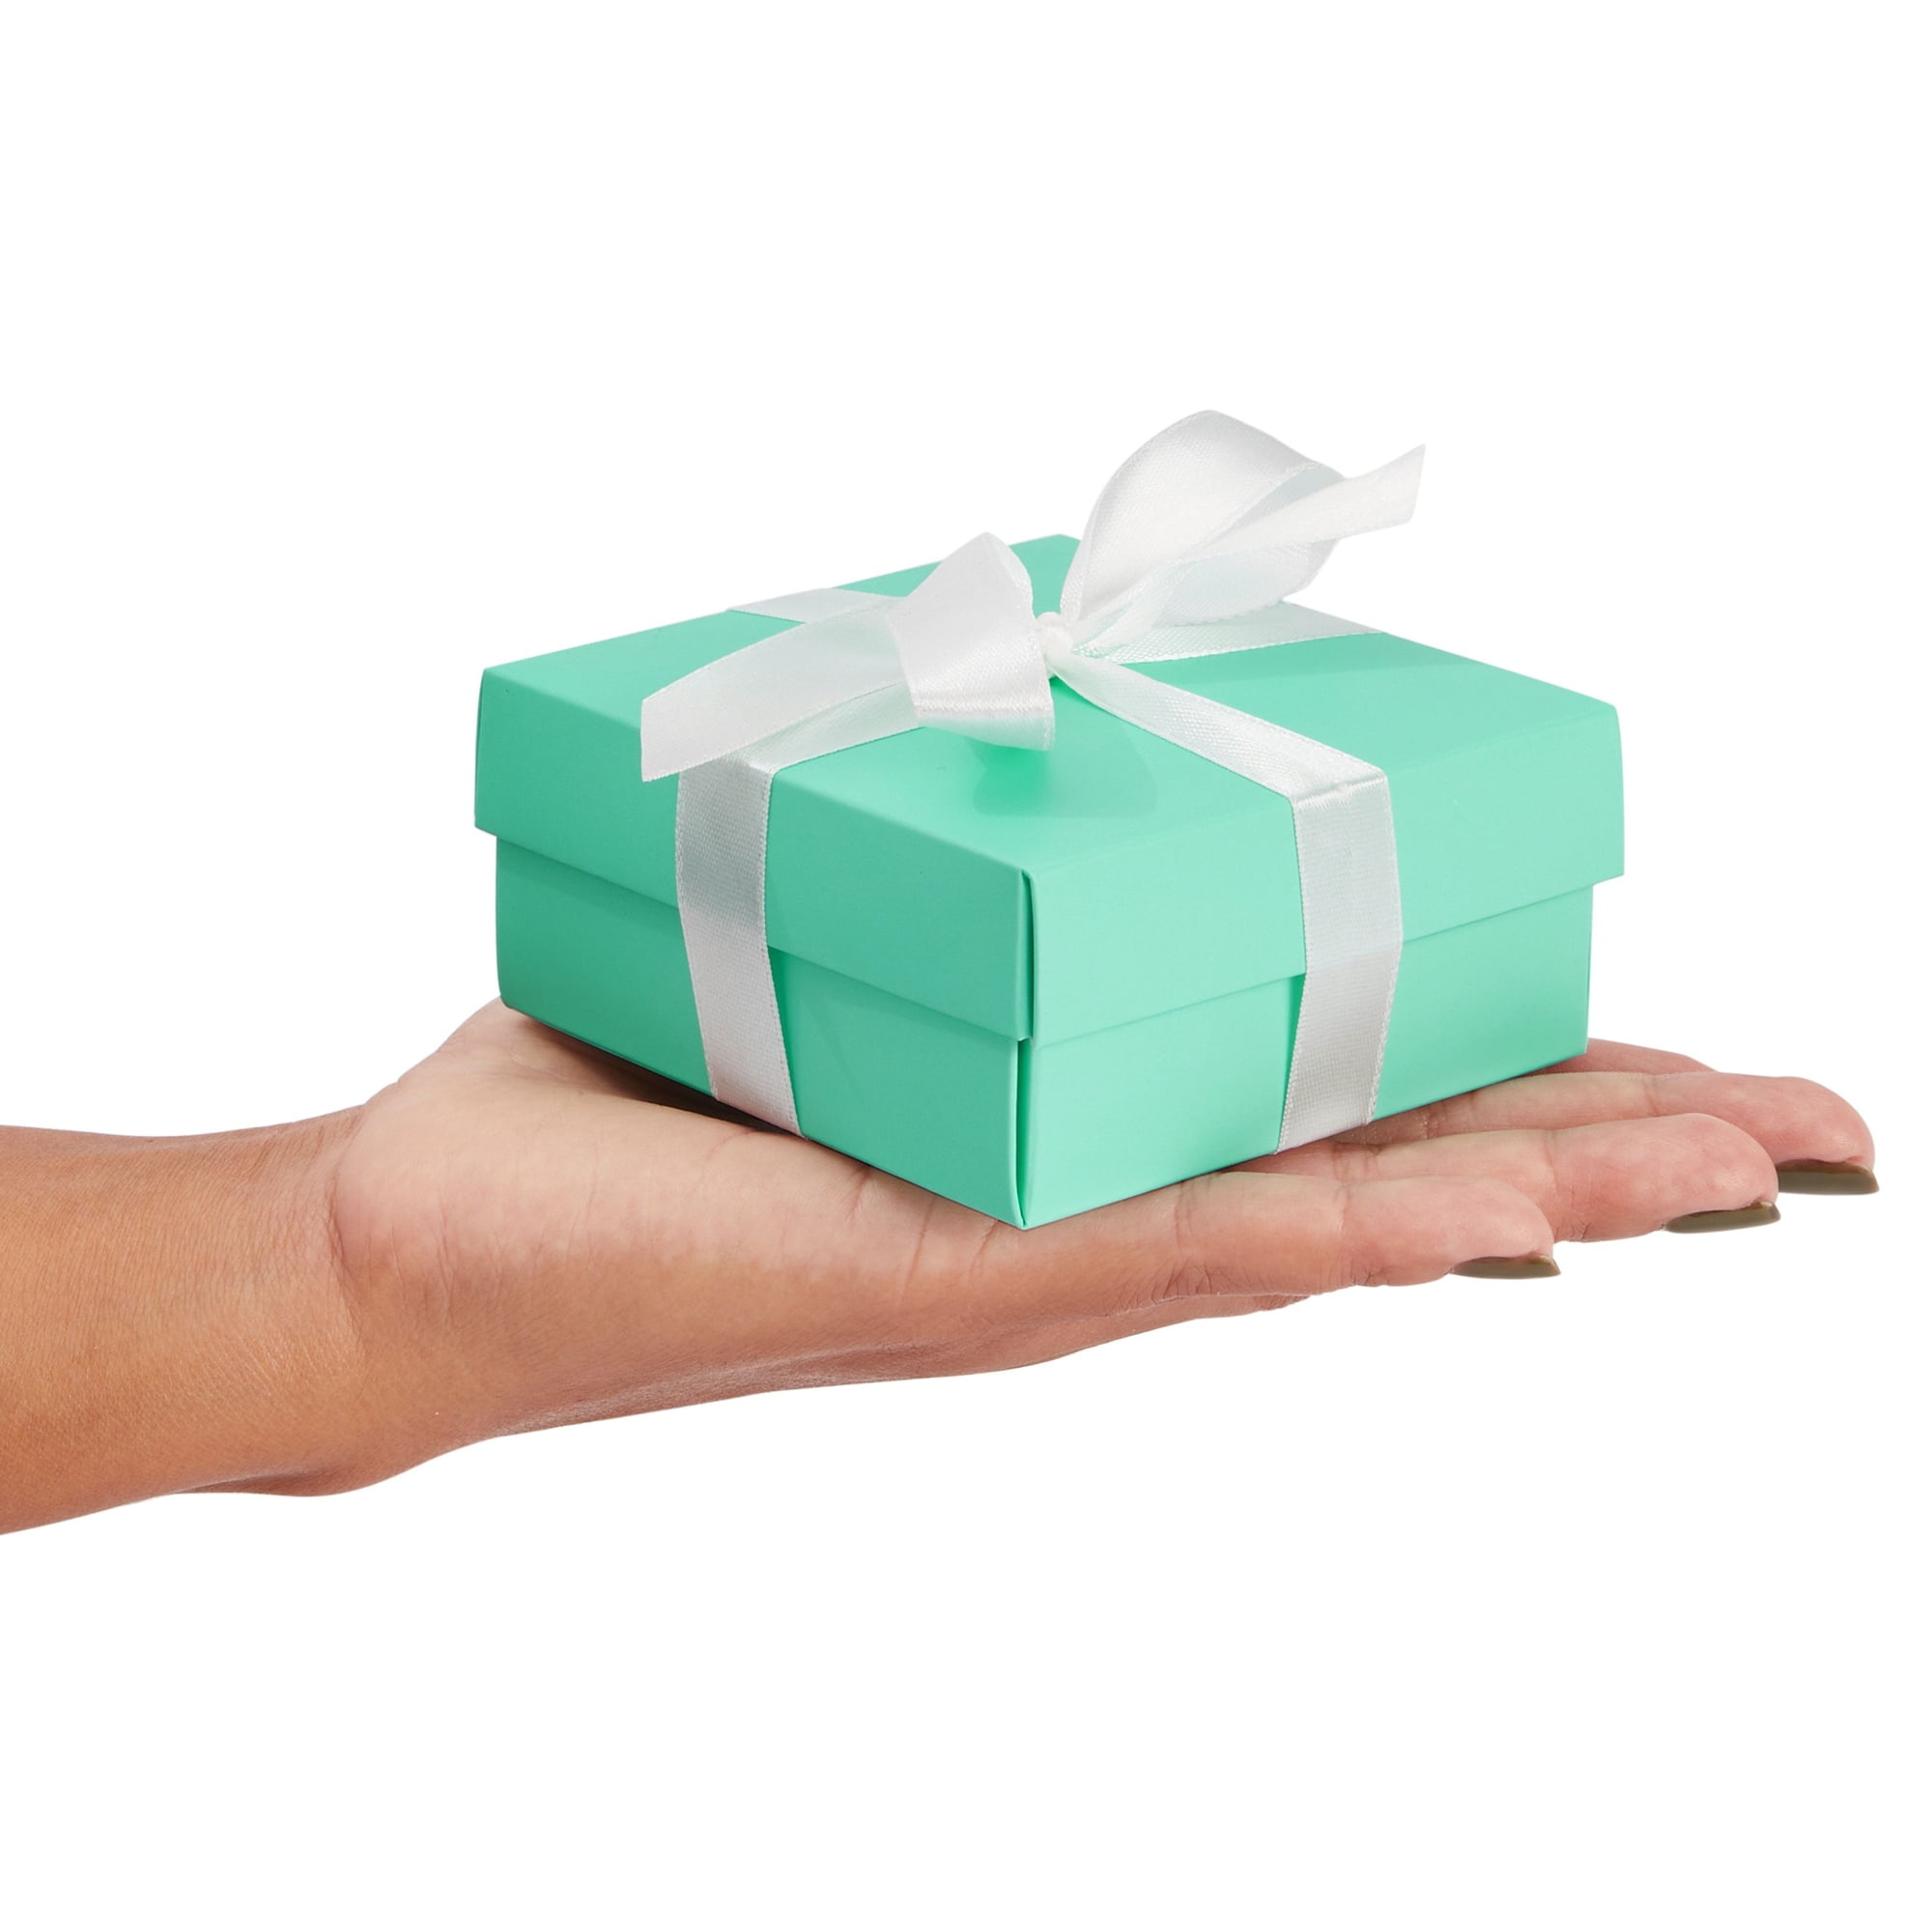 Turquoise Gift Boxes - with Lids and Bases - Box and Wrap